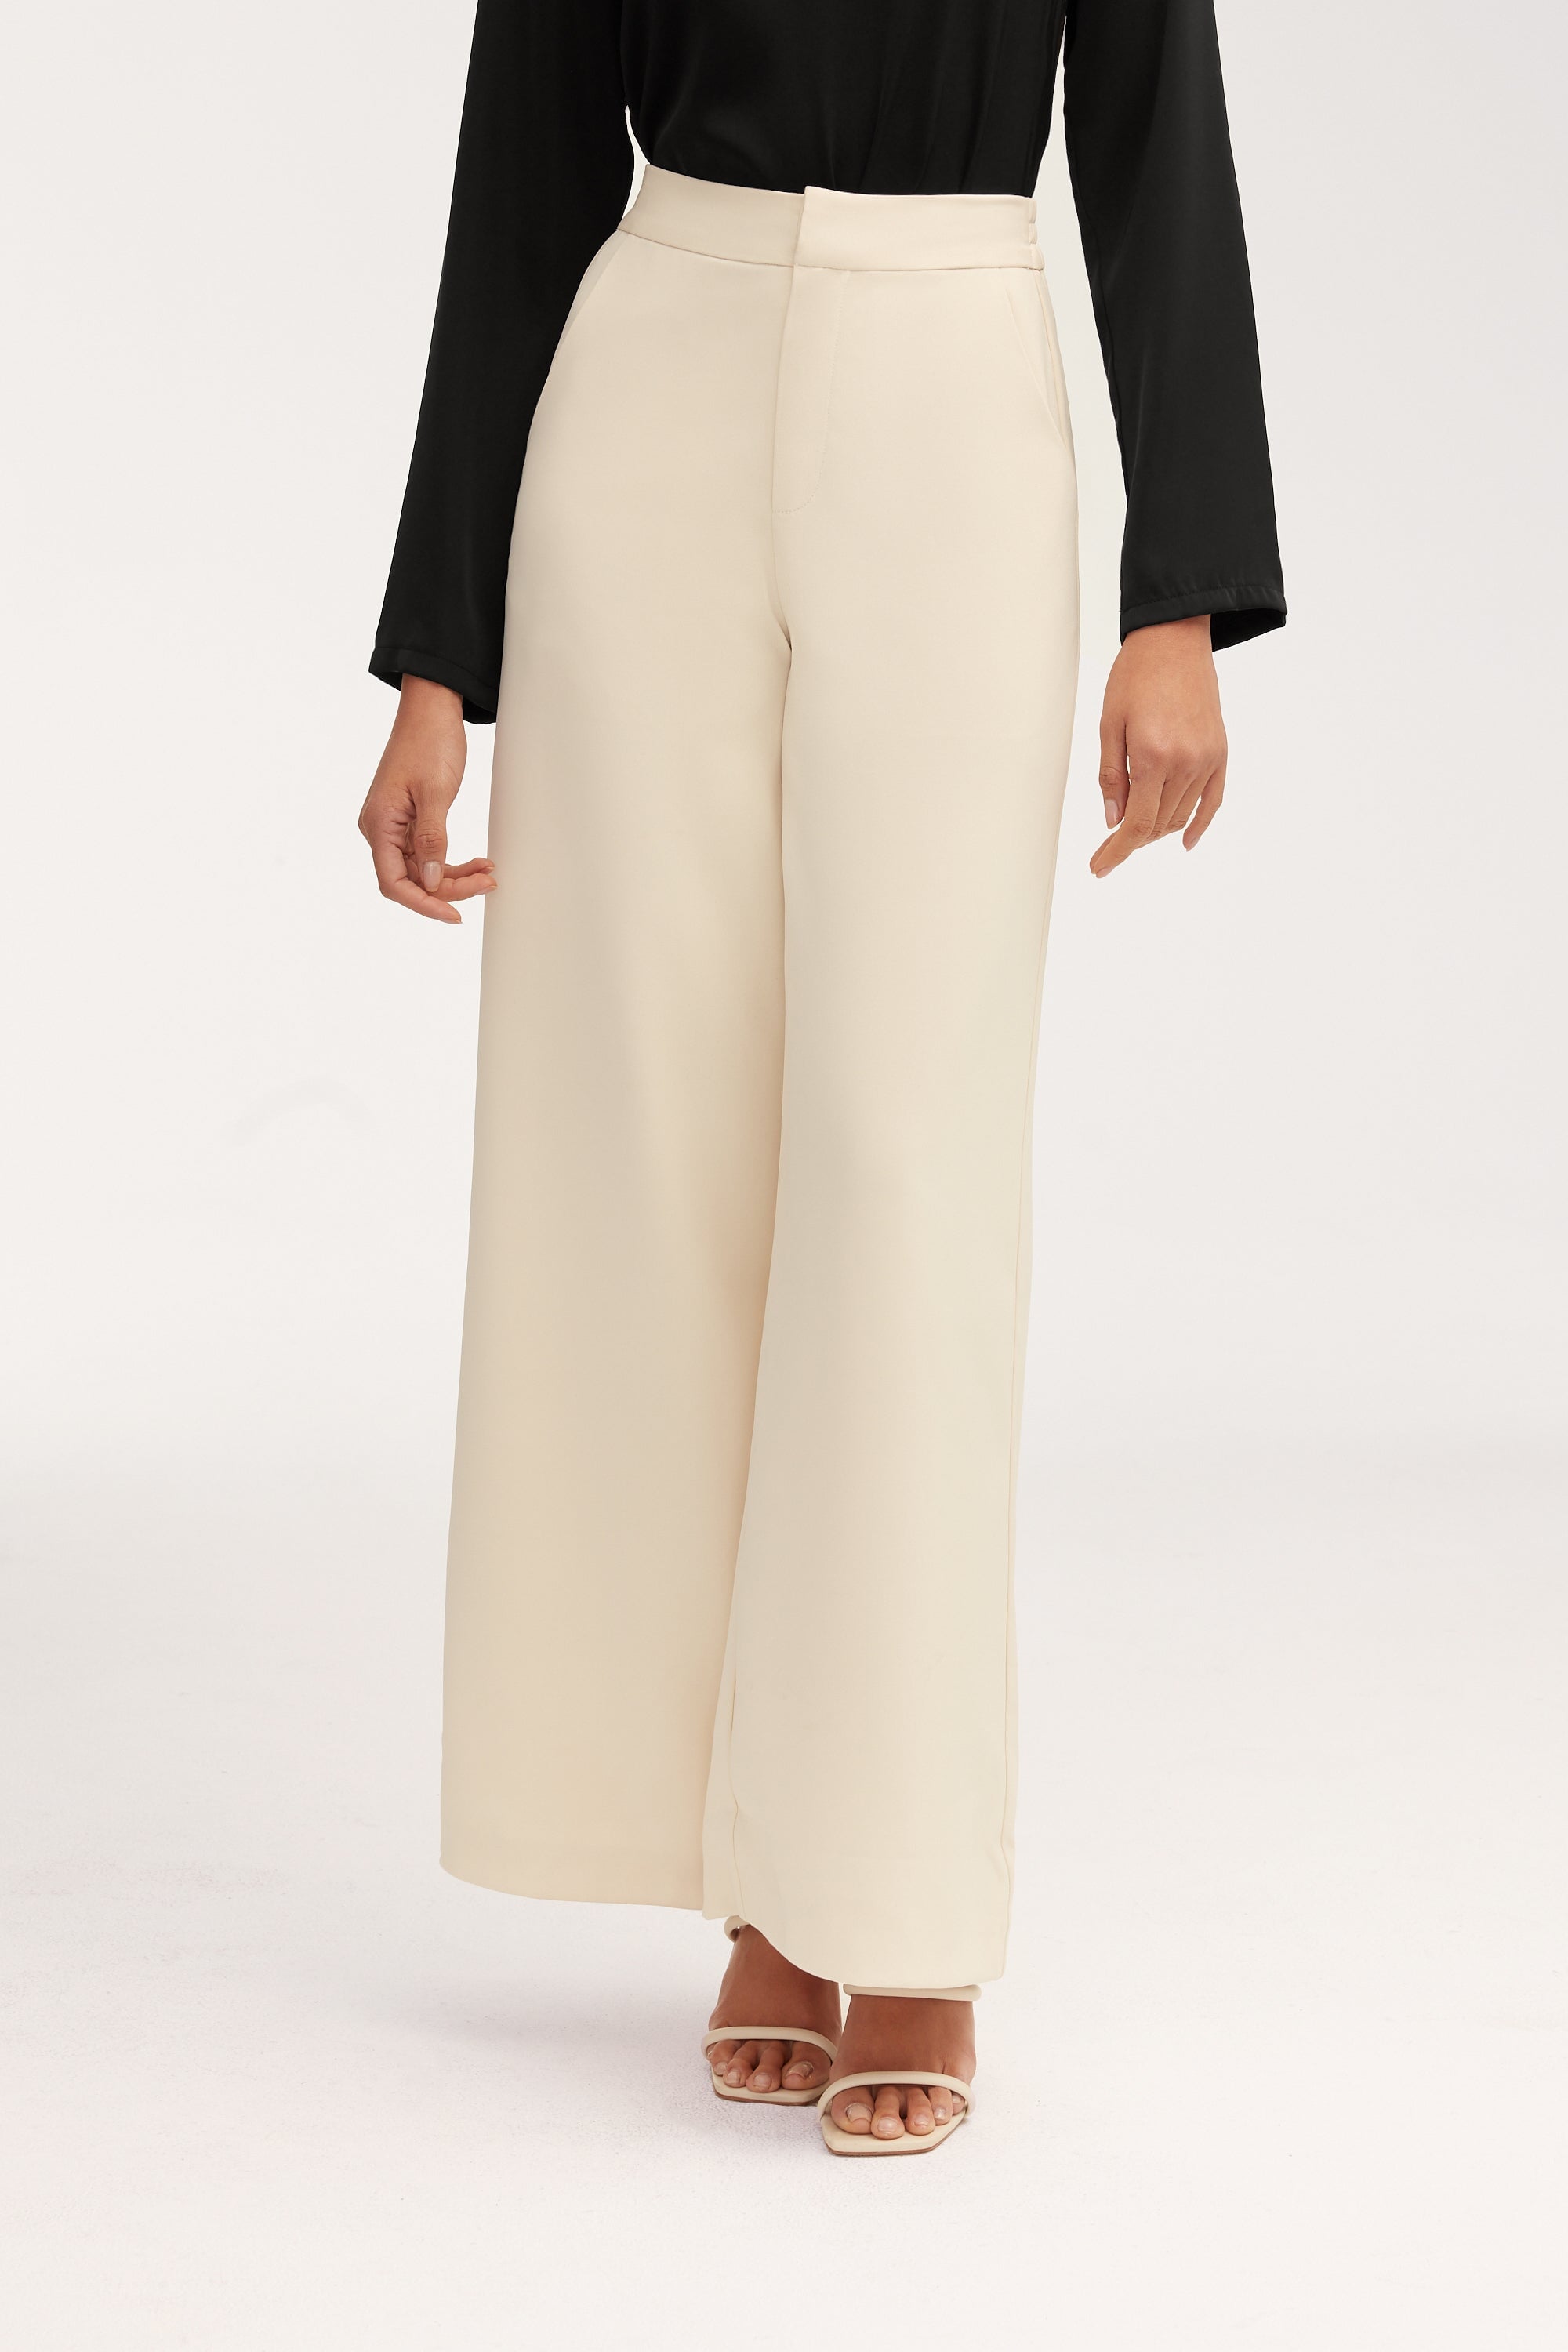 Essential Ultra Wide Leg Pants - Off White Clothing Veiled 